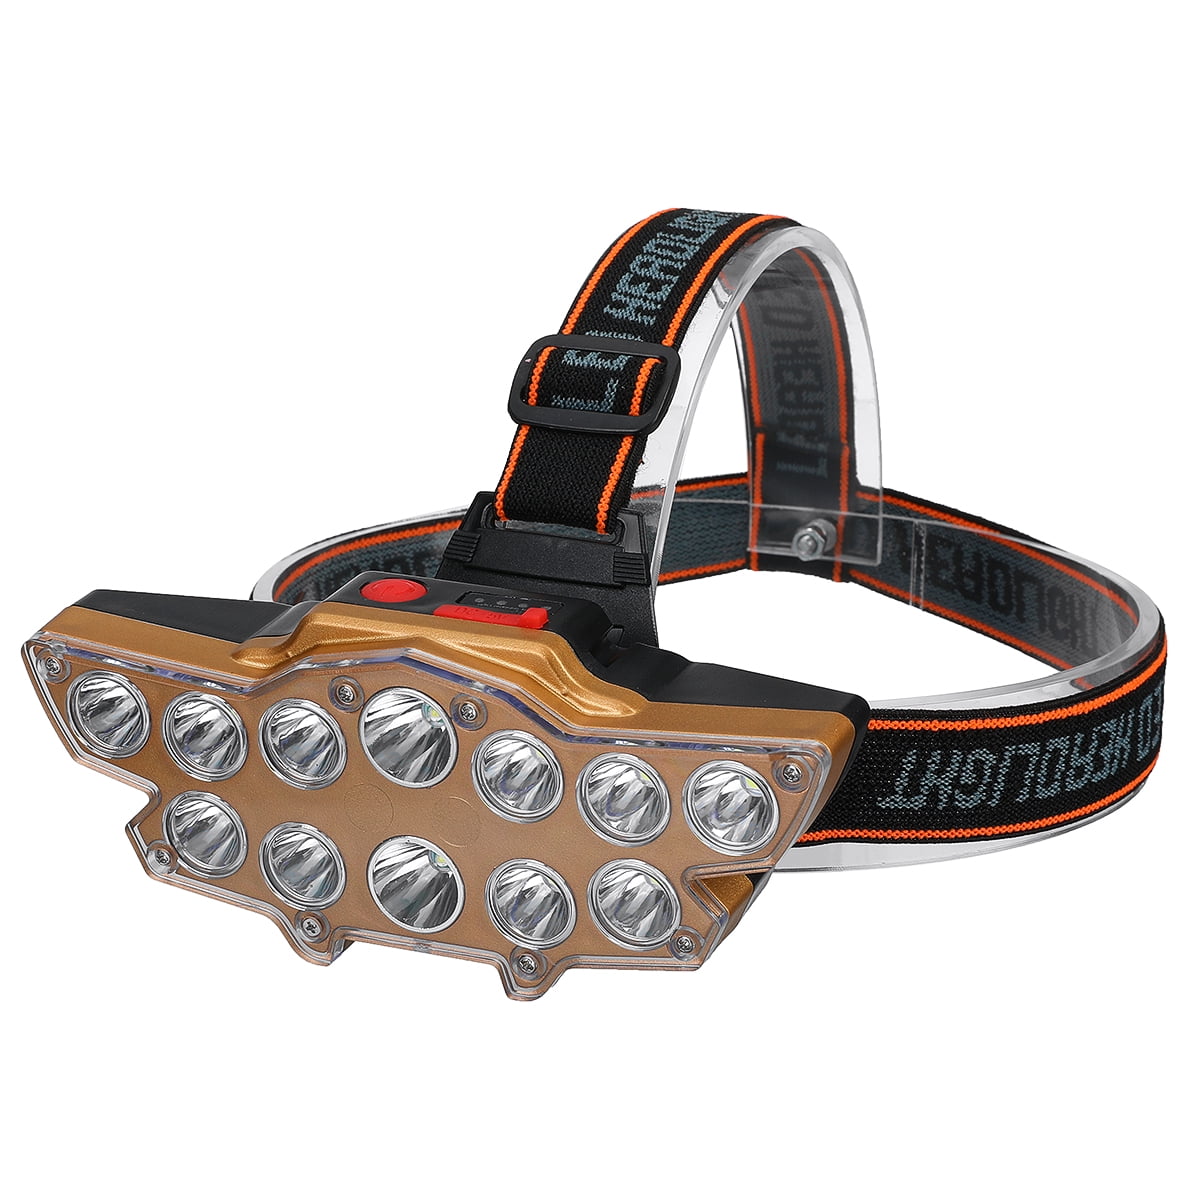 Hard Hat Headlamp USB Rechargeable with FREE Pen Light 